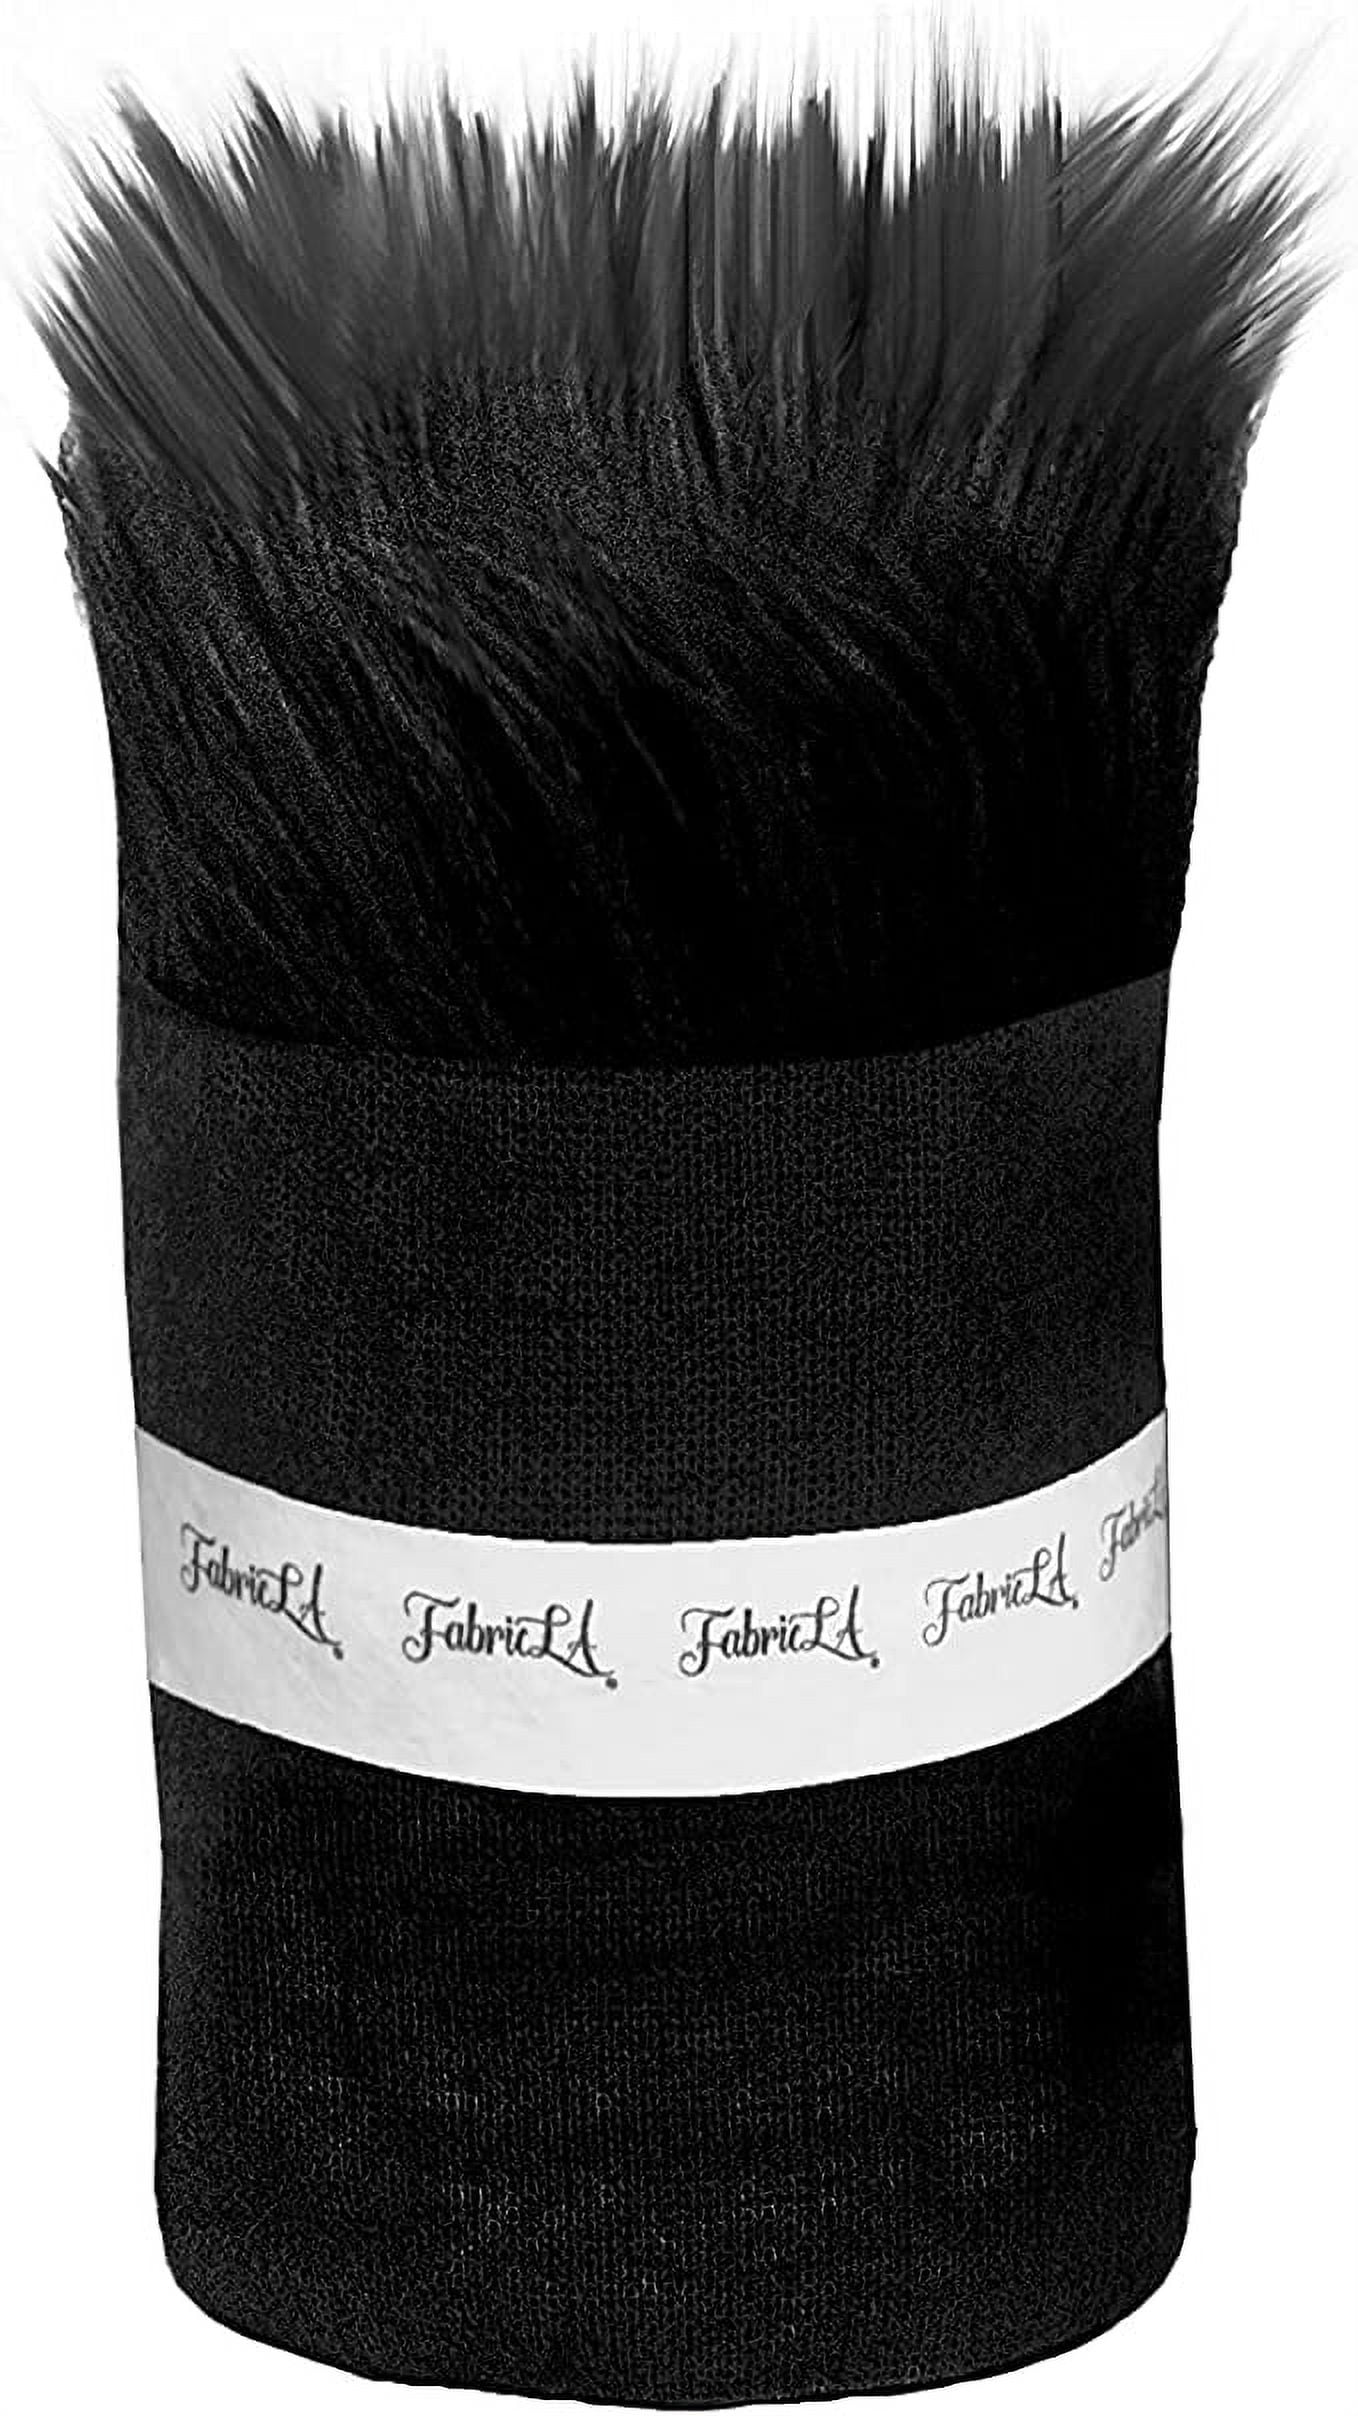 Black Shag Faux Animal Fur by the Yard 58 Roll Long Pile Soft Fake Fur for  DIY Crafts, Costumes, Fur Coats, Clothing, and Blankets 